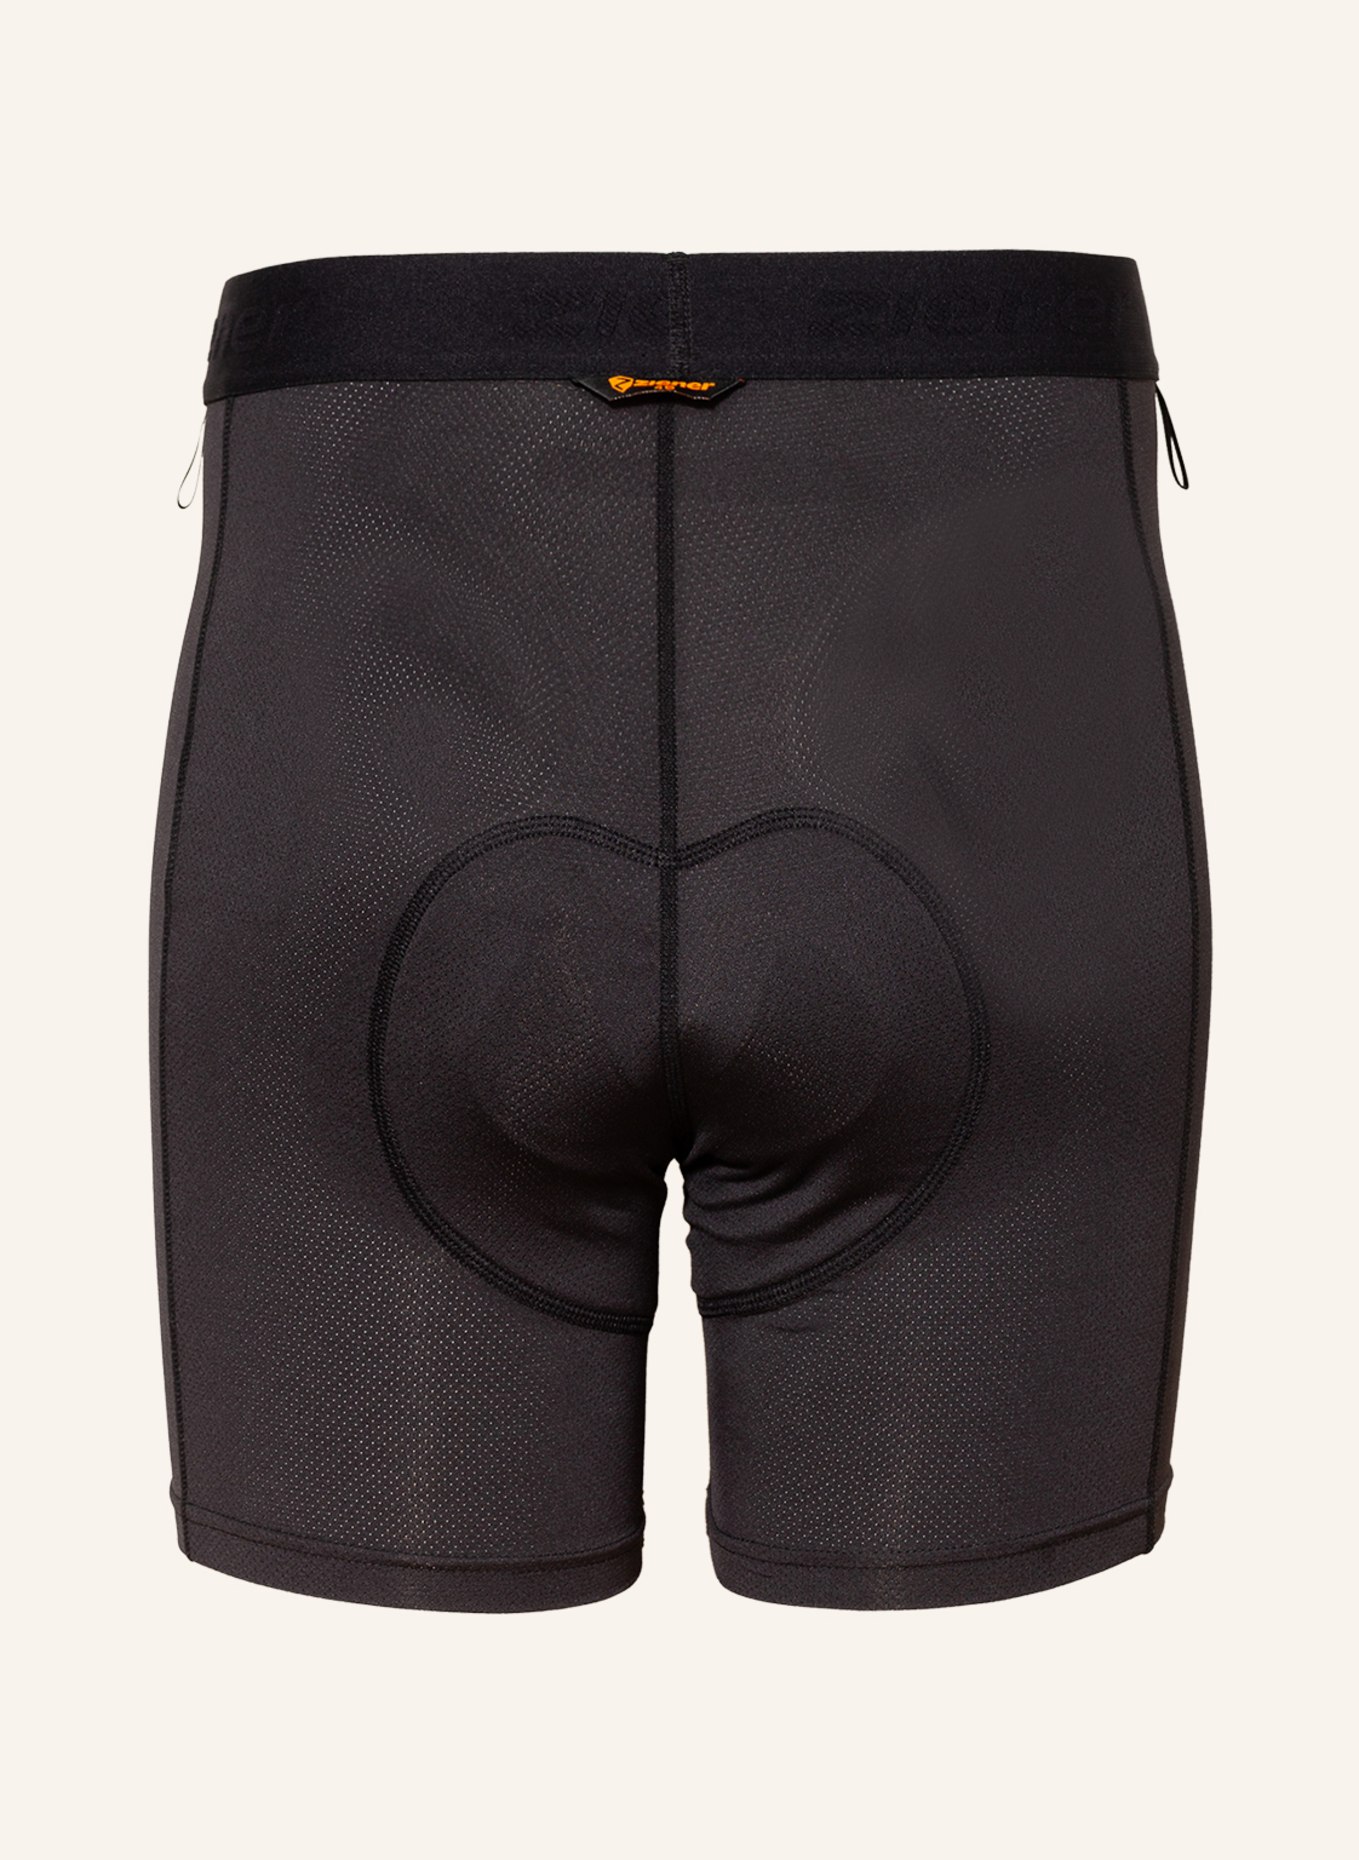 ziener Cycling undershorts NEPO X-FUNCTION with padded mesh insert, Color: BLACK (Image 2)